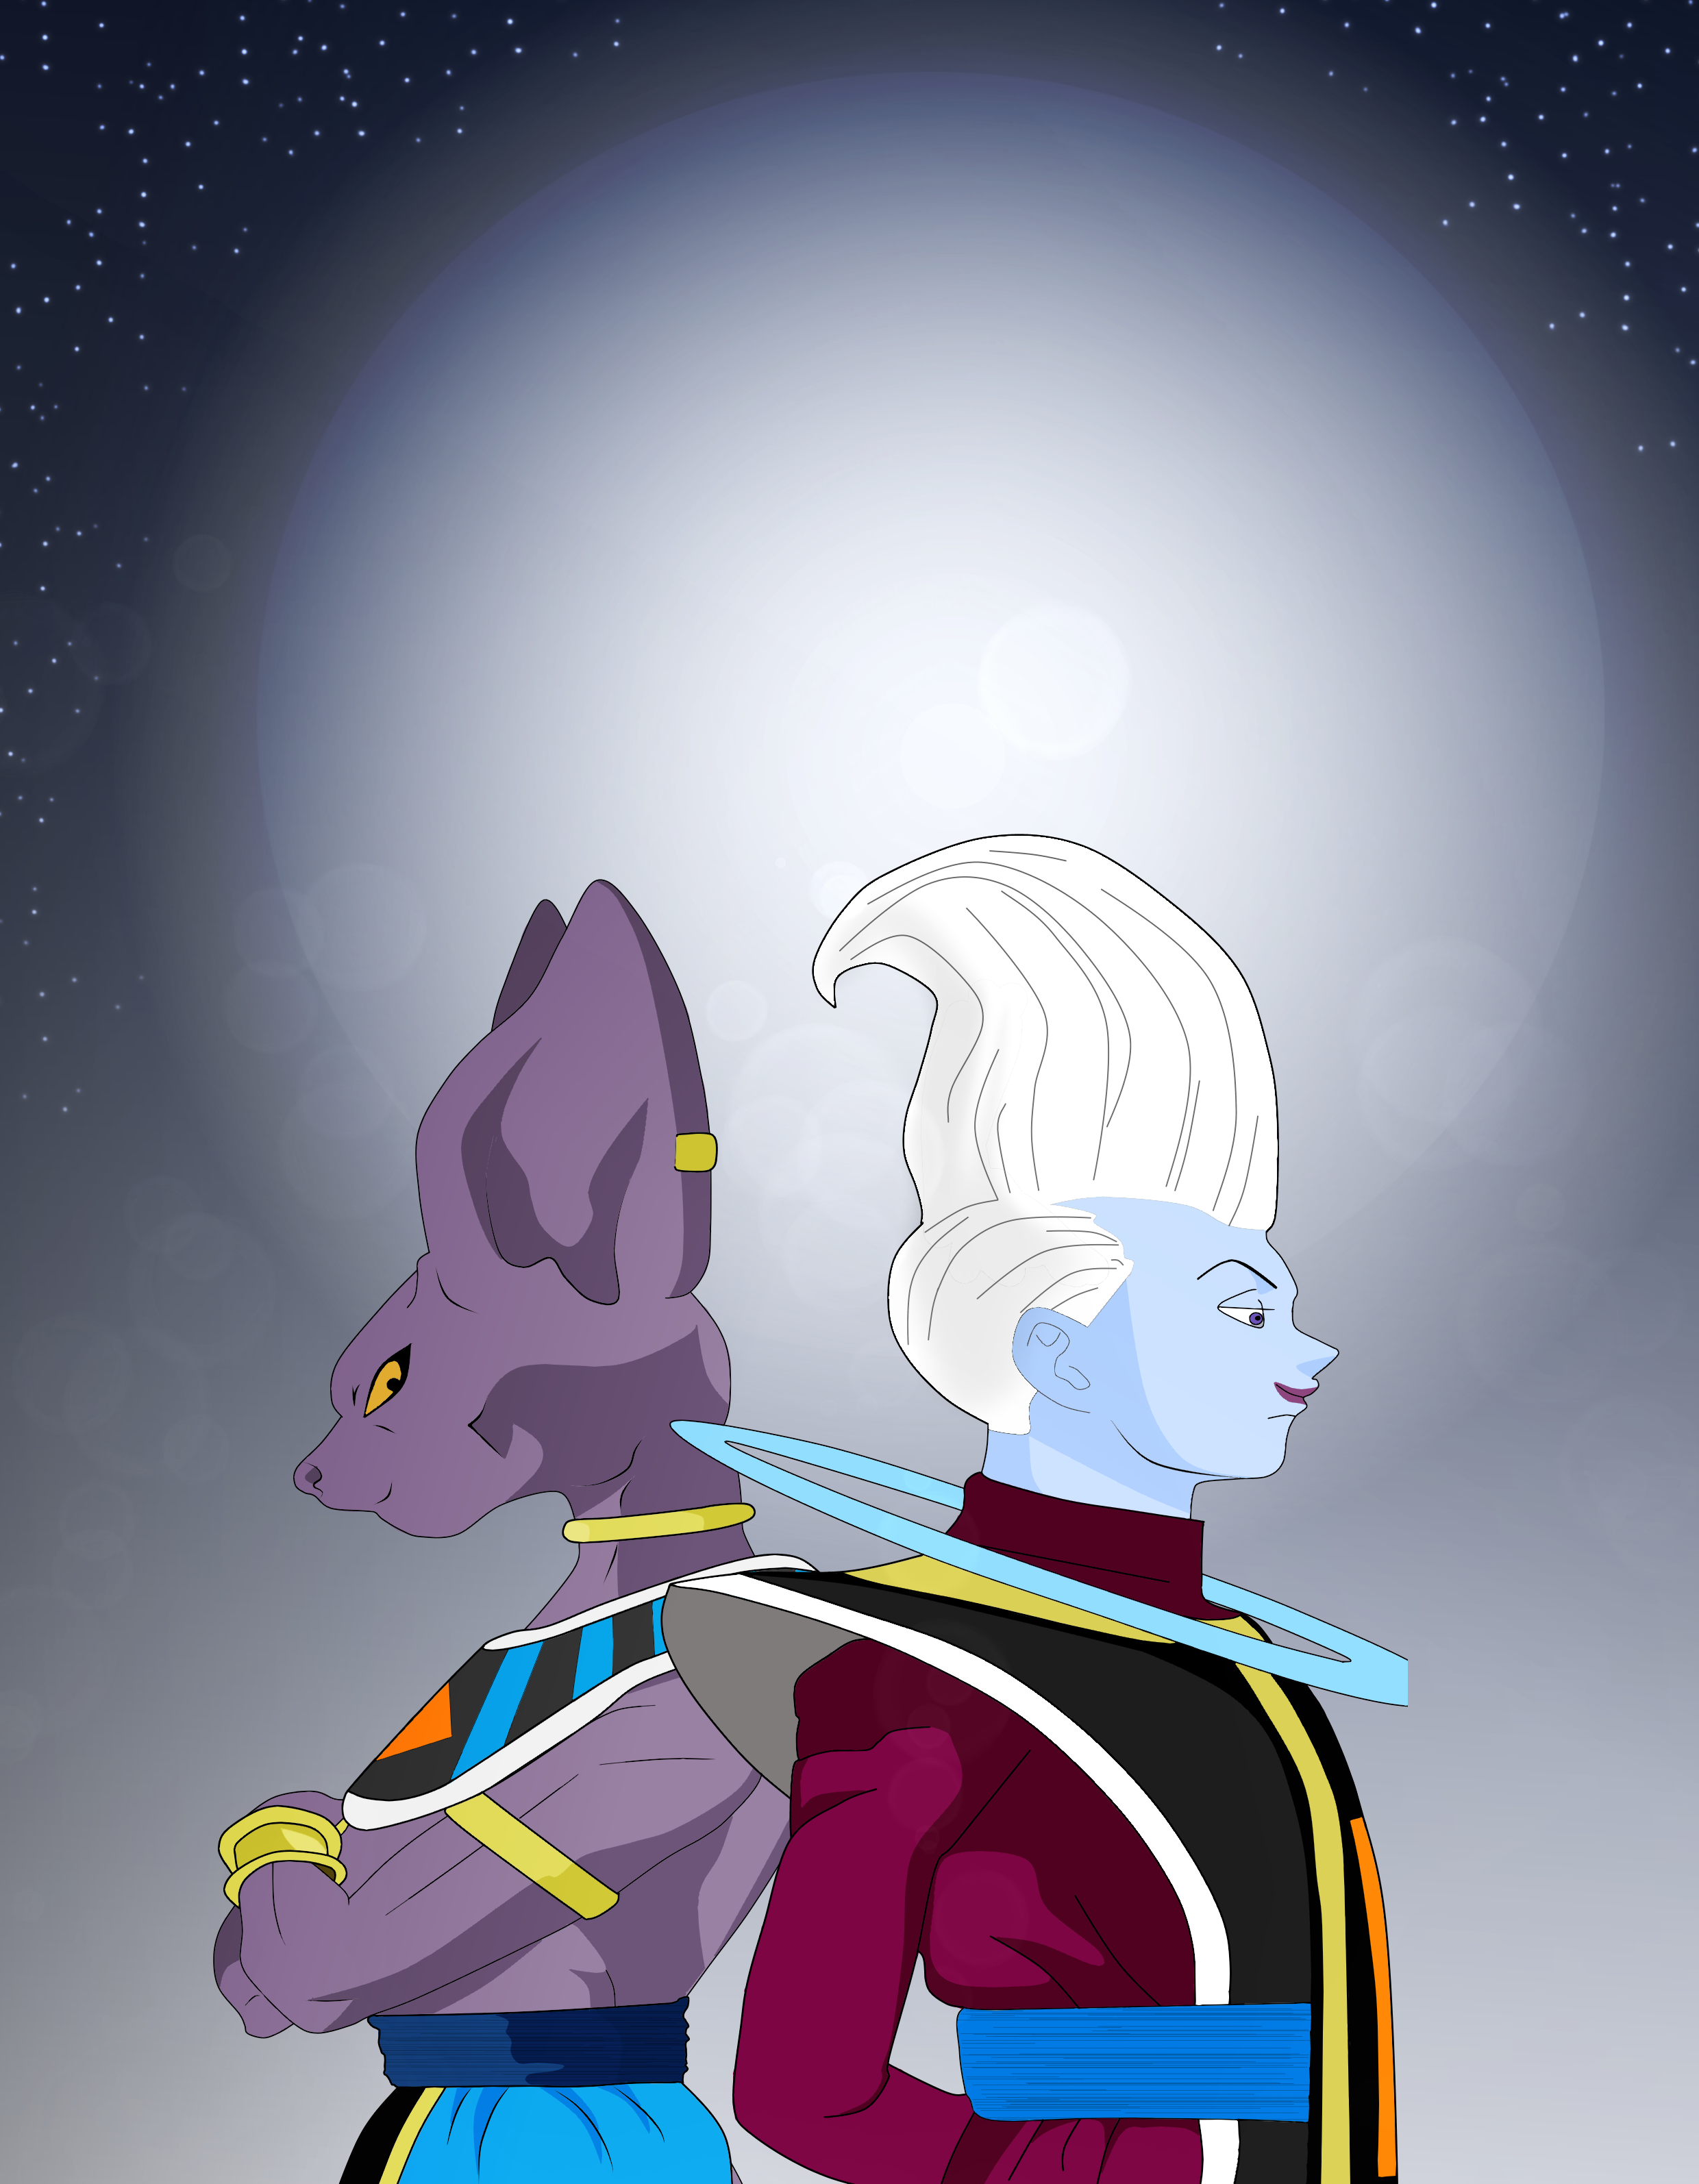 Whis and Beerus by Moncef23dz